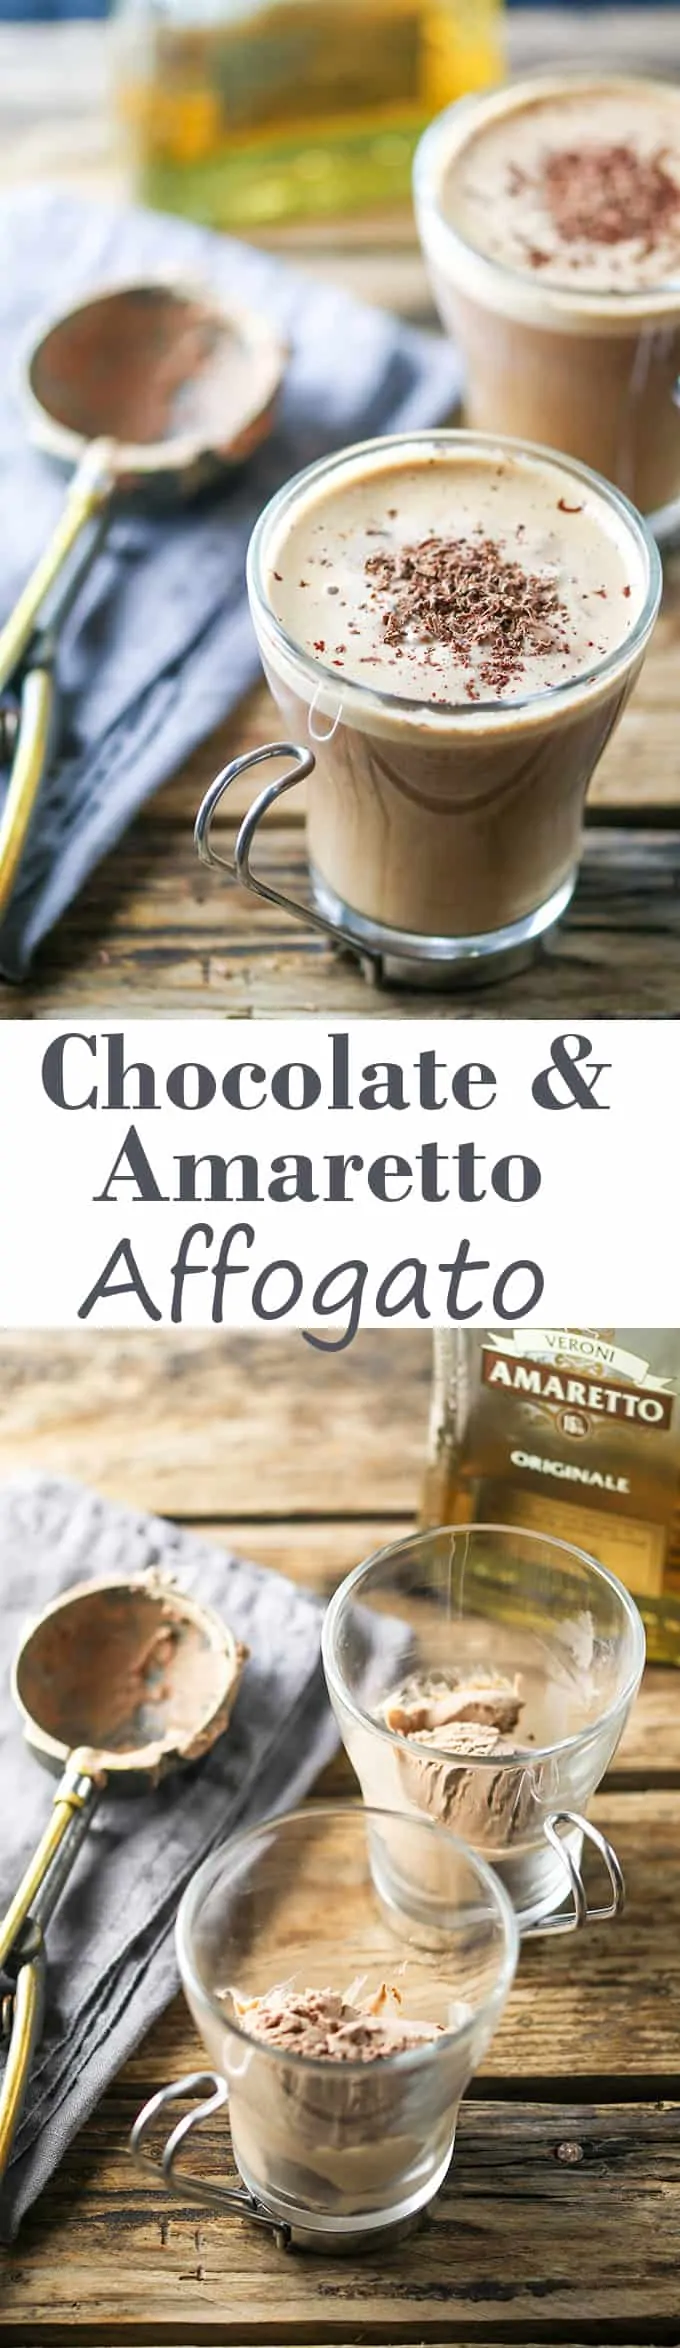 Chocolate and Amaretto Affogato - A boozy dessert-meets-coffee with a scoop of chocolate ice cream.